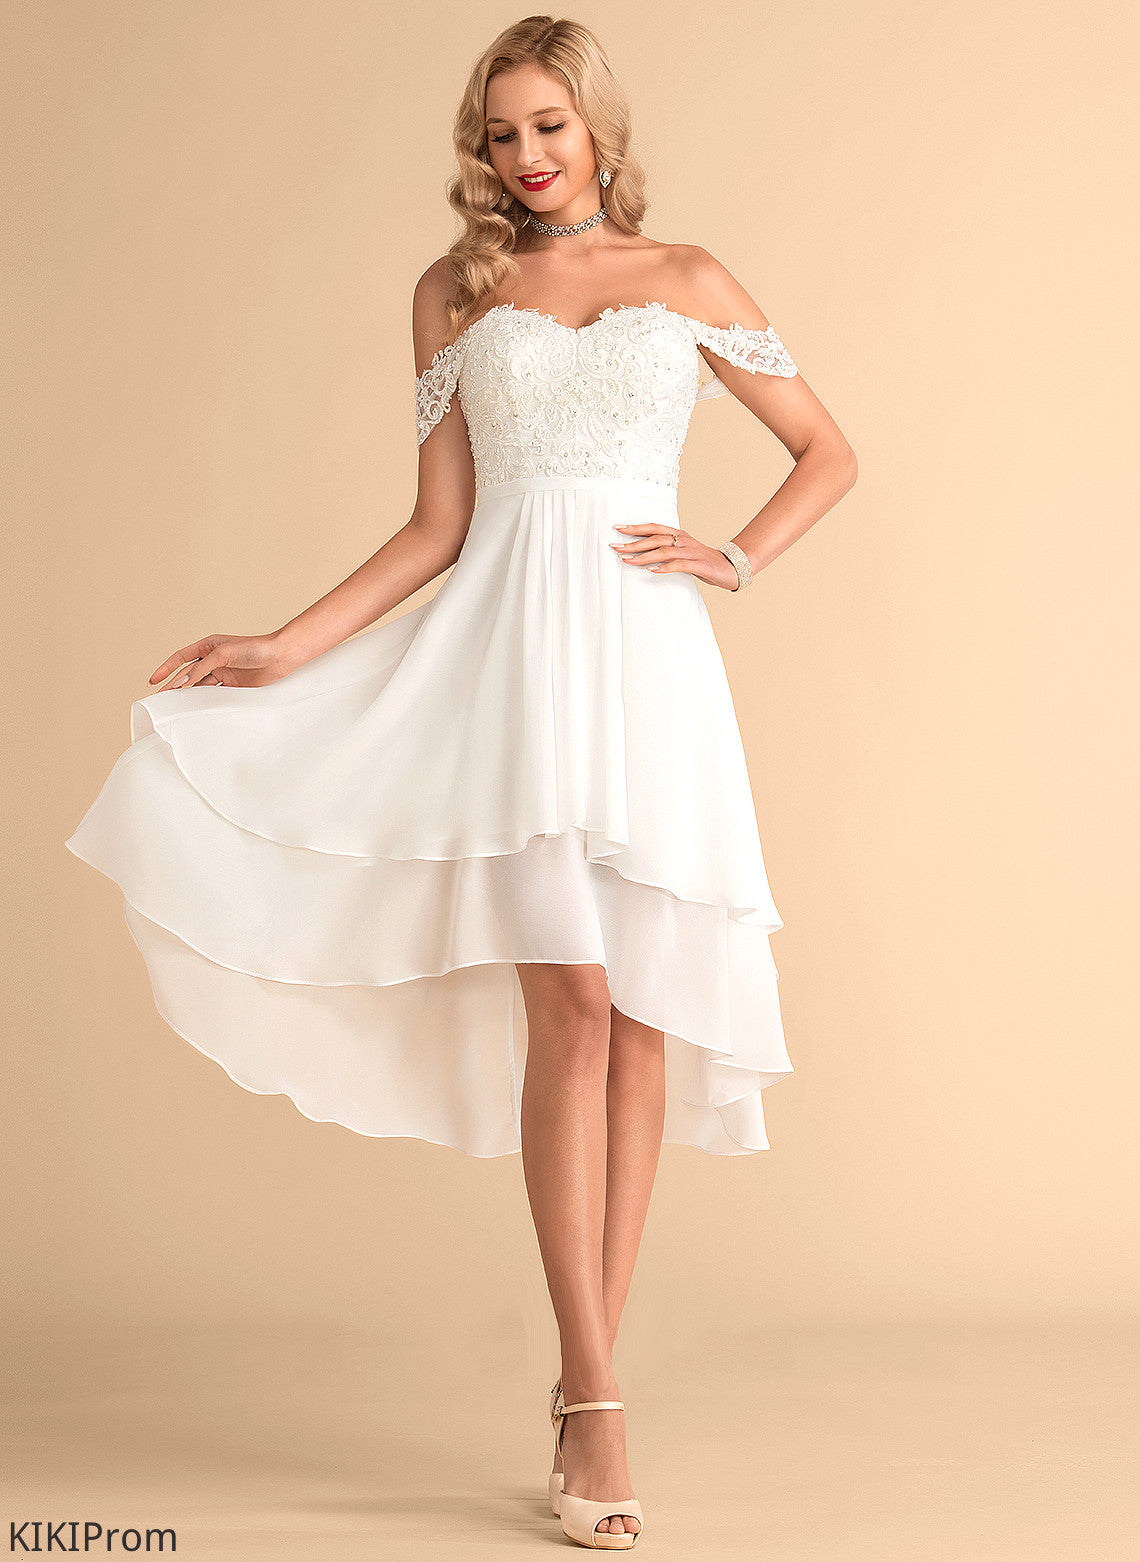 With Wedding Penelope Wedding Dresses A-Line Lace Dress Asymmetrical Chiffon Beading Sequins